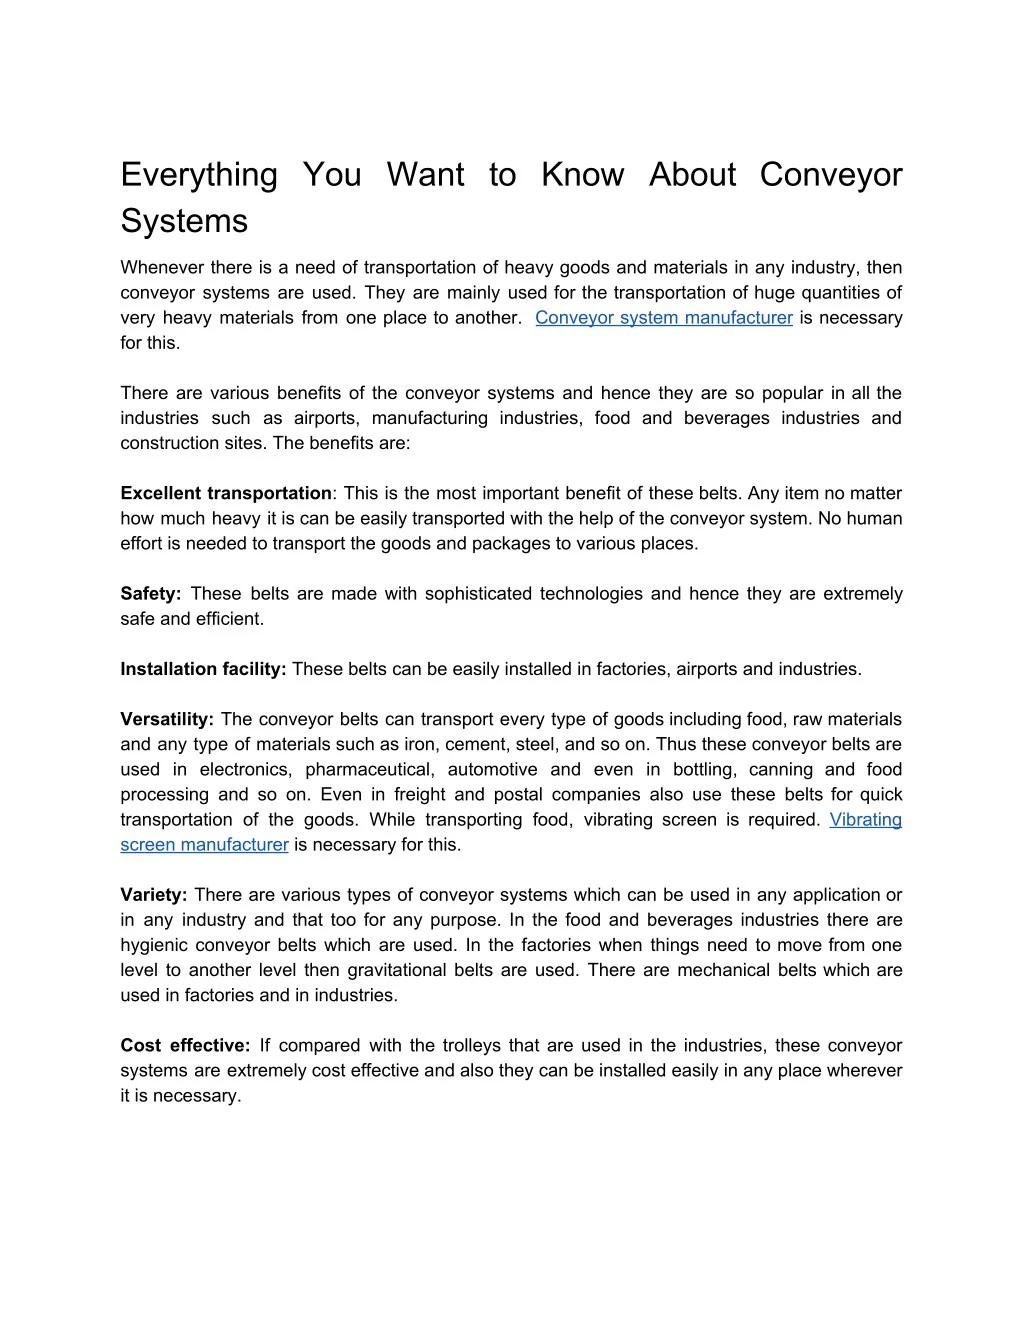 everything you want to know about conveyor systems